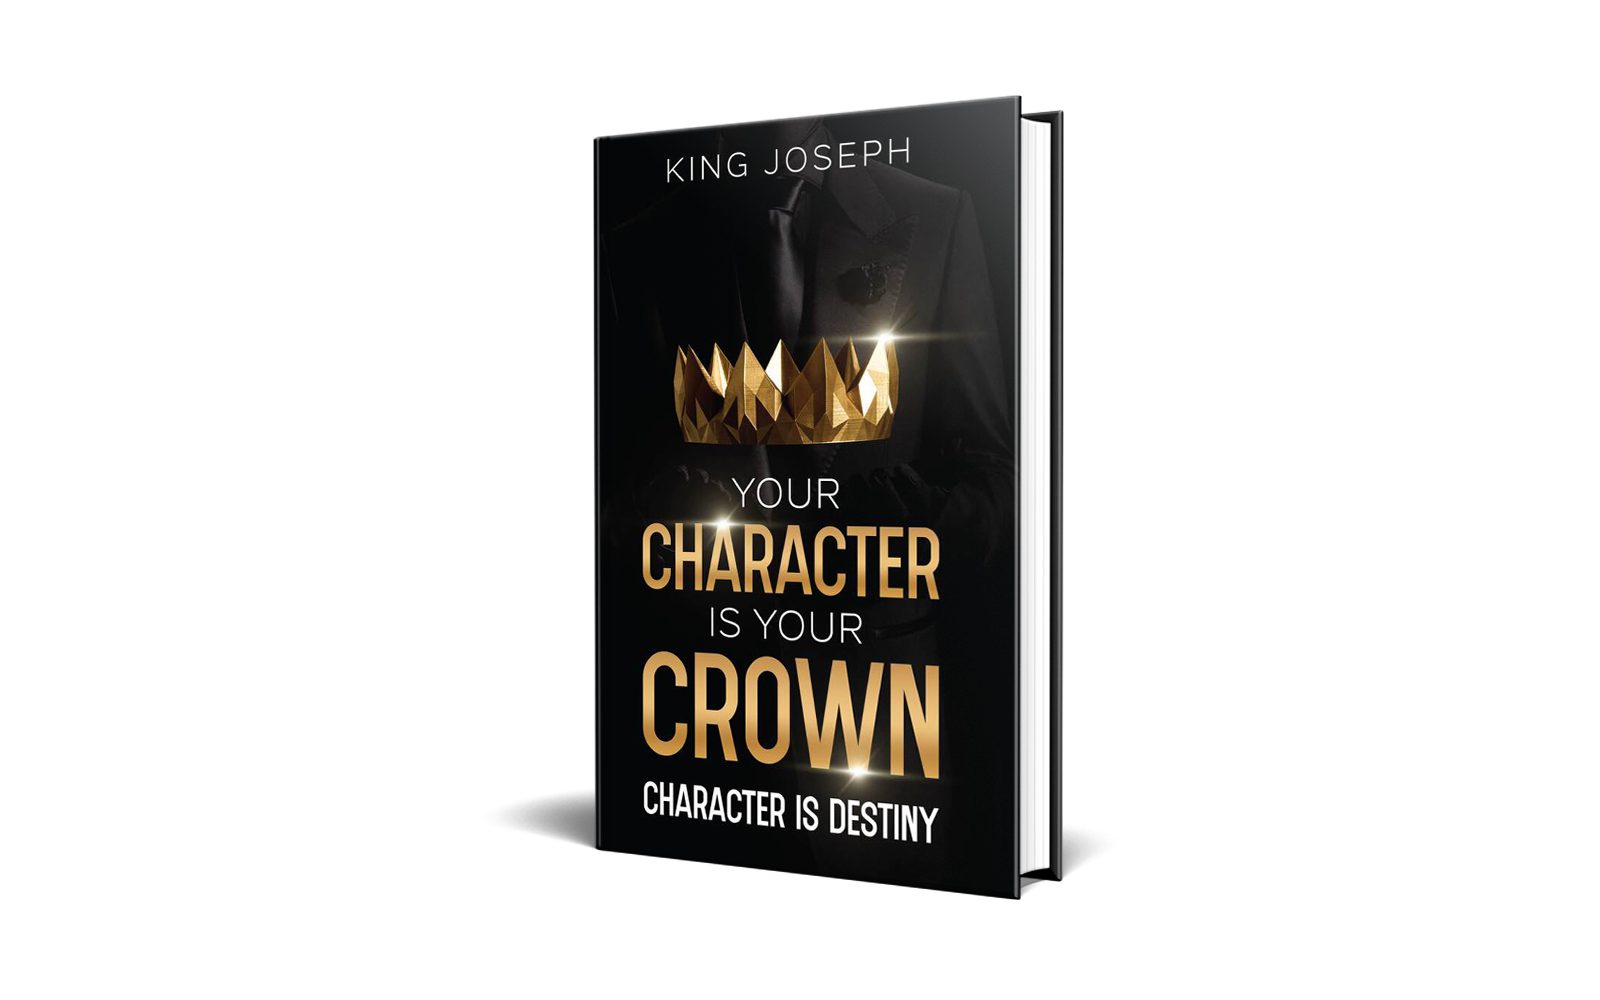 Author King Joseph Unveils Groundbreaking Approach to Personal Evolution in New Book, 'Your Character Is Your Crown: Character Is Destiny'